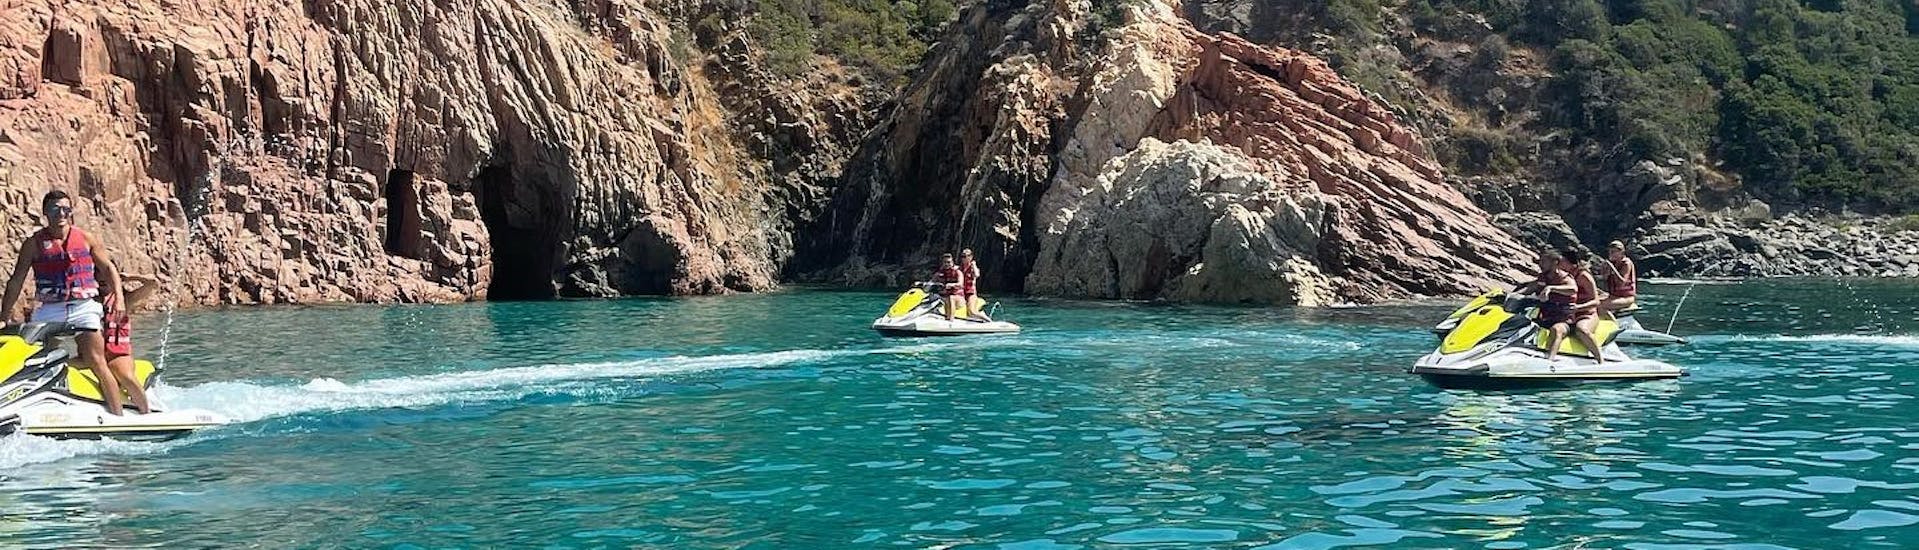 Several jet skis during the Jet Ski Safari to the Calanques de Piana from Cargèse with Fun Jet Location Cargèse.